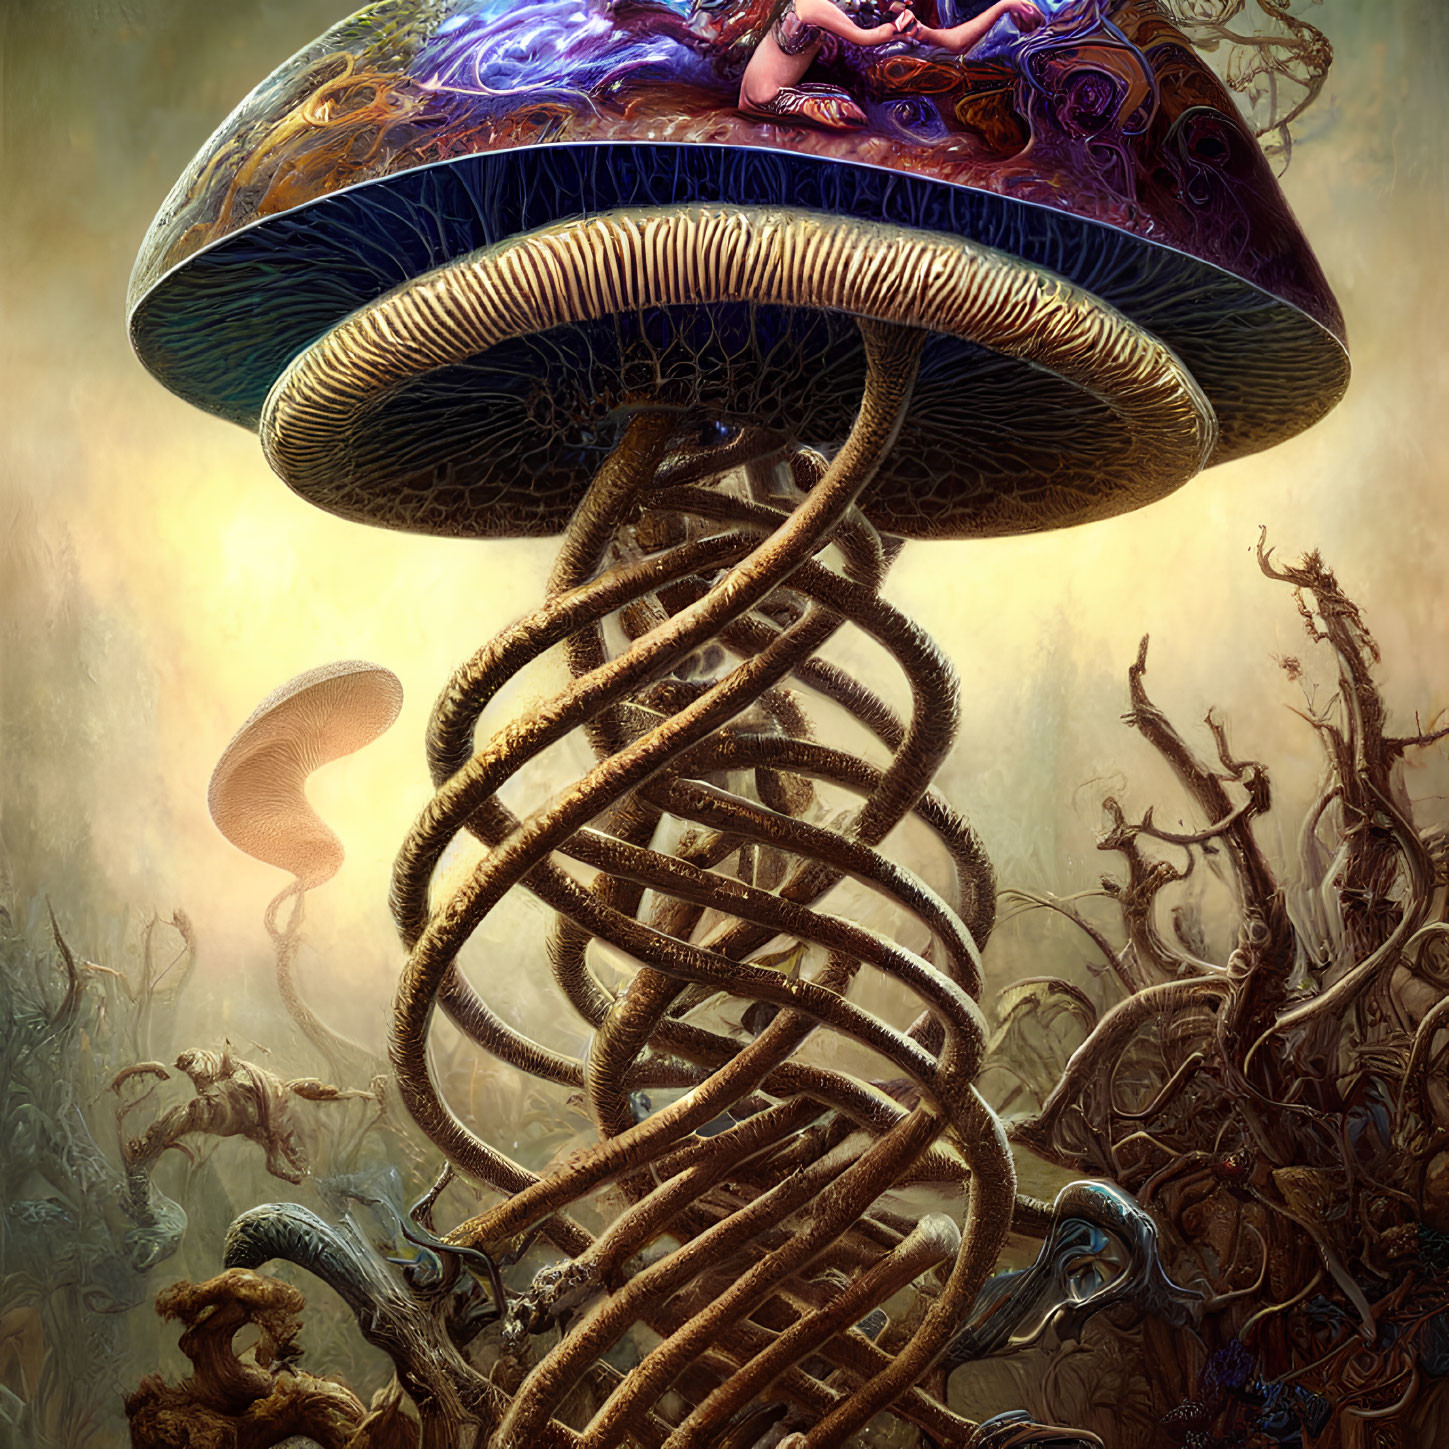 Fantastical image of giant mushroom with spiral staircase in misty setting